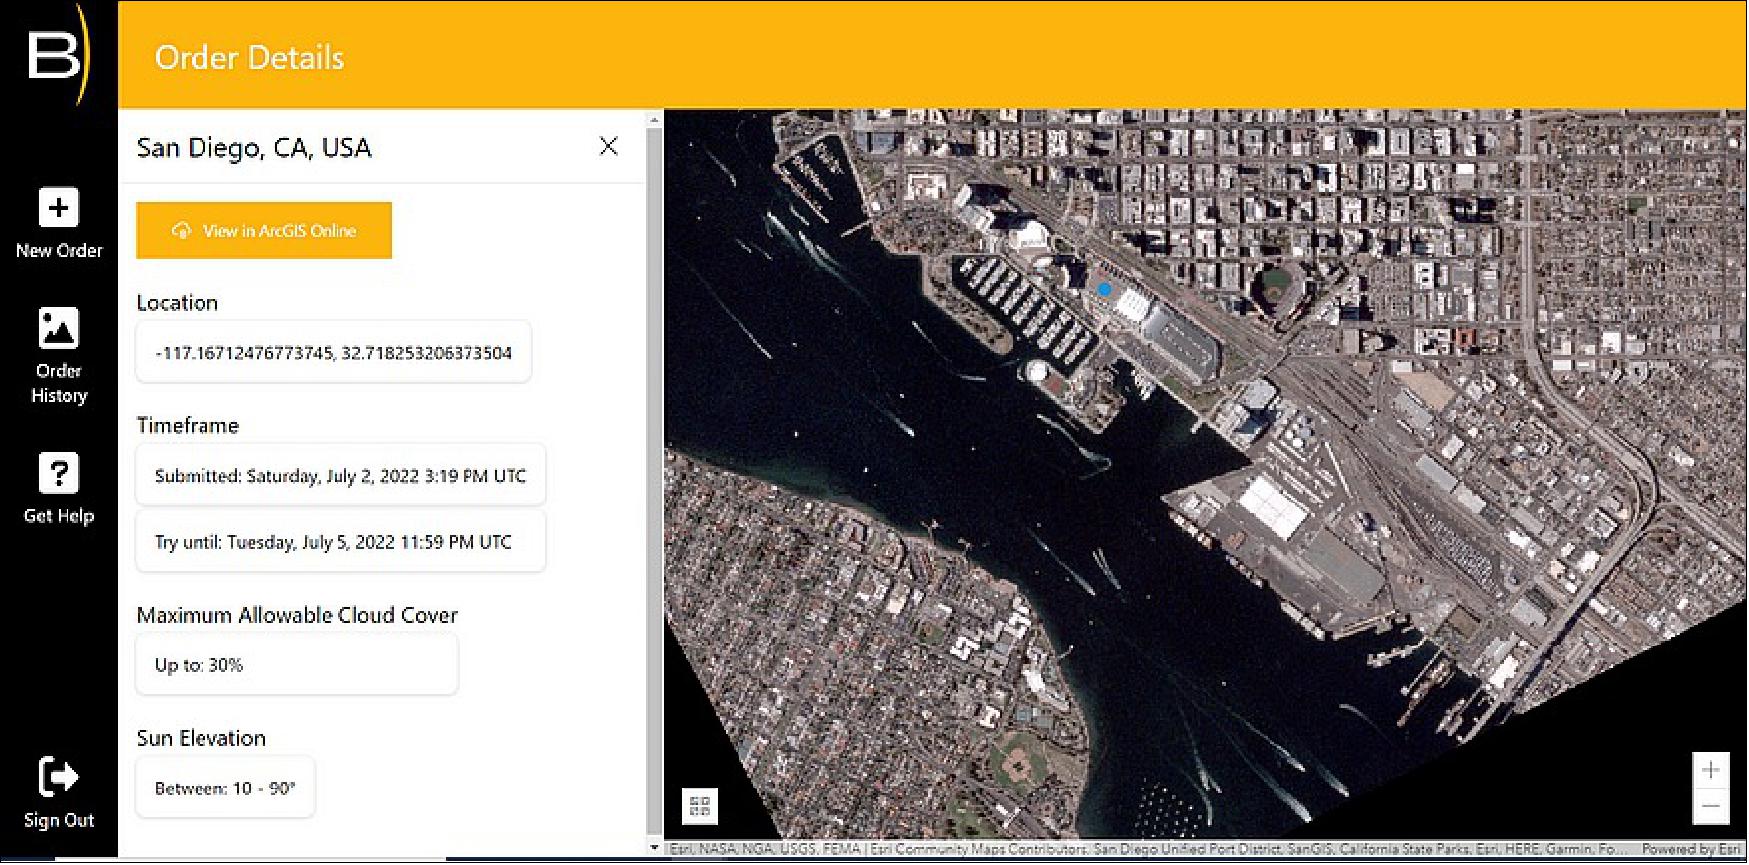 Figure 7: BlackSky and Esri released a cloud-based satellite tasking application called BlackSky Tasking for ArcGIS Online. This image shows the BlackSky Tasking interface focused on downtown San Diego, the location of the Esri User Conference 2022 (image credit: BlackSky)